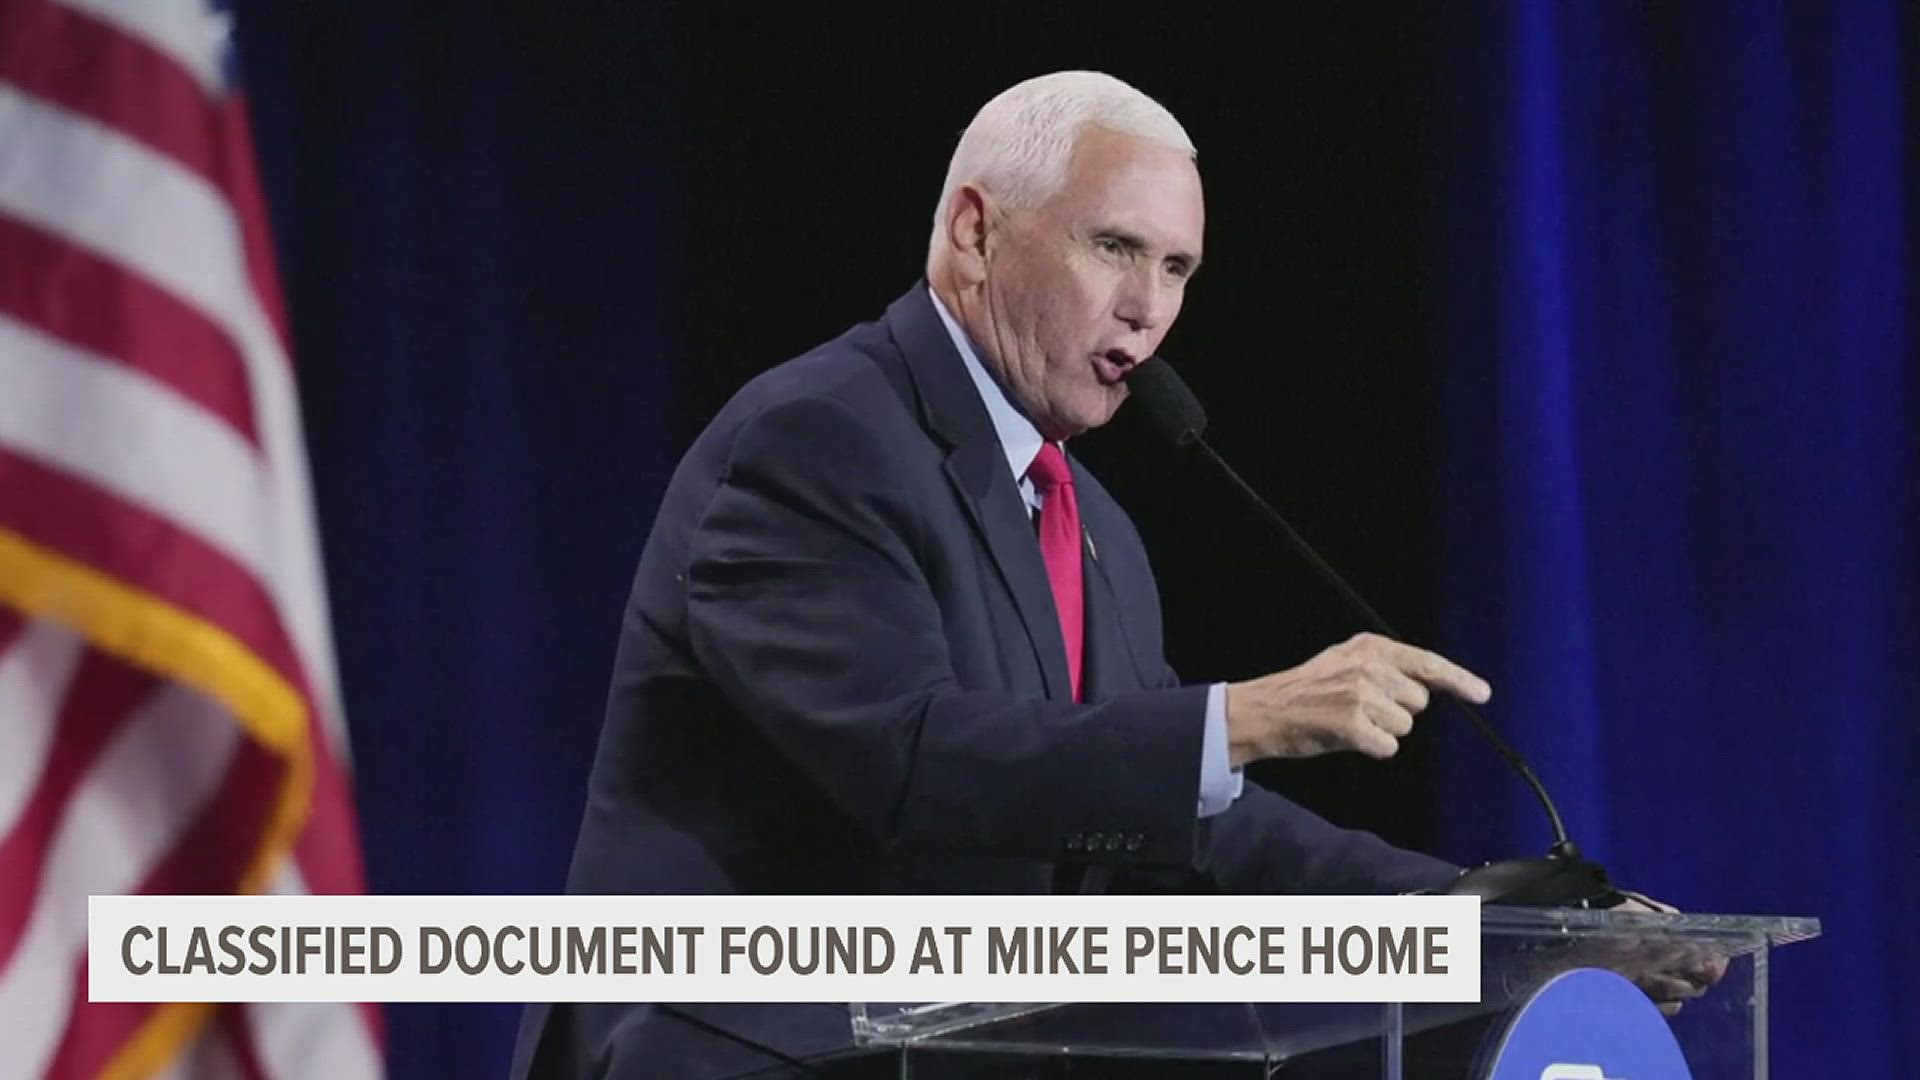 The FBI found another classified document at the former VP's Indiana Home as he faces a subpoena as part of the investigation into Trump's mishandling of documents.